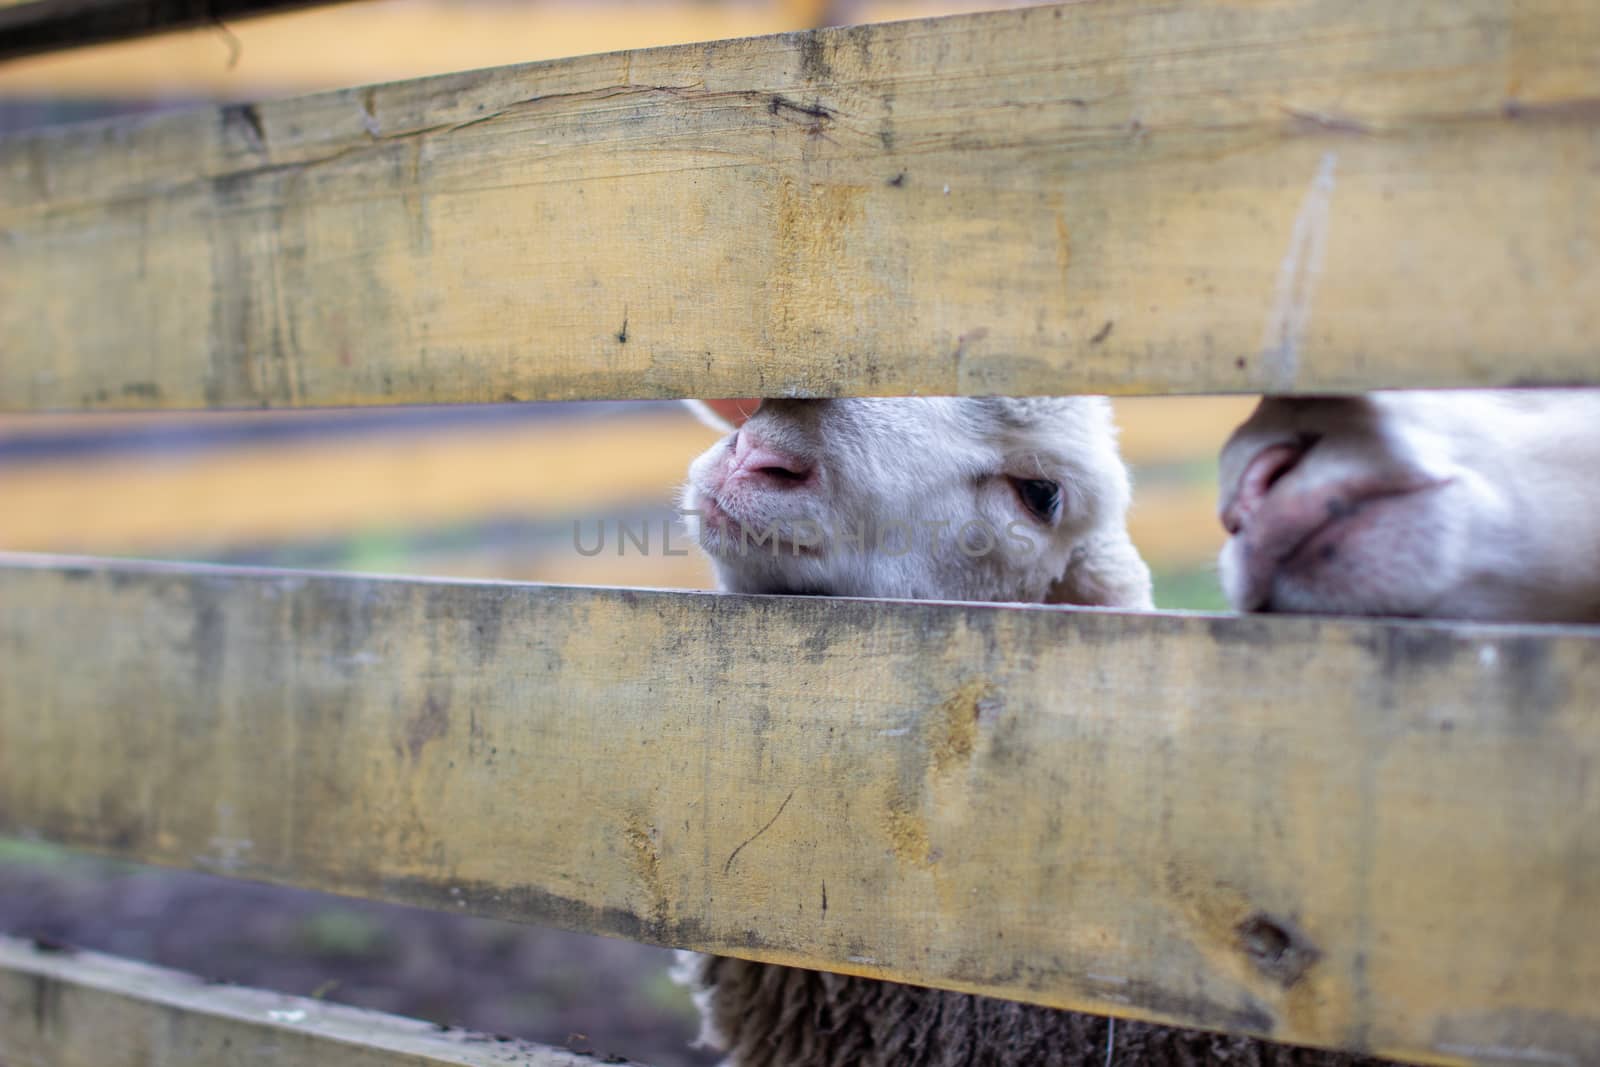 A man feeds white sheep over a fence. Sheep poke their heads through a gap in a wooden fence